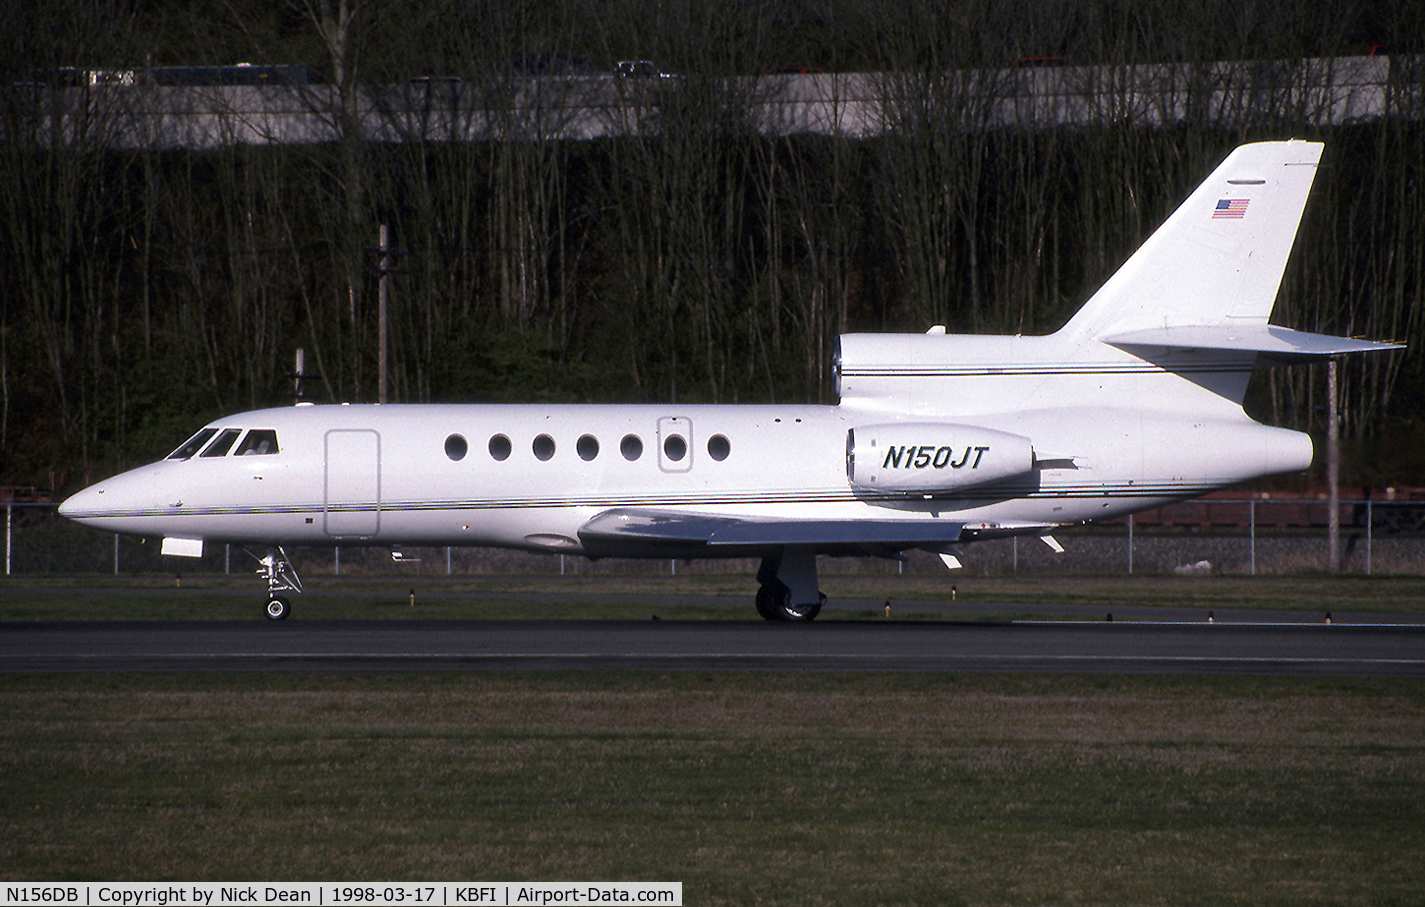 N156DB, 1981 Dassault Falcon 50 C/N 40, KBFI (Seen here as N150JT this airframe is currently registered N156DB as posted)